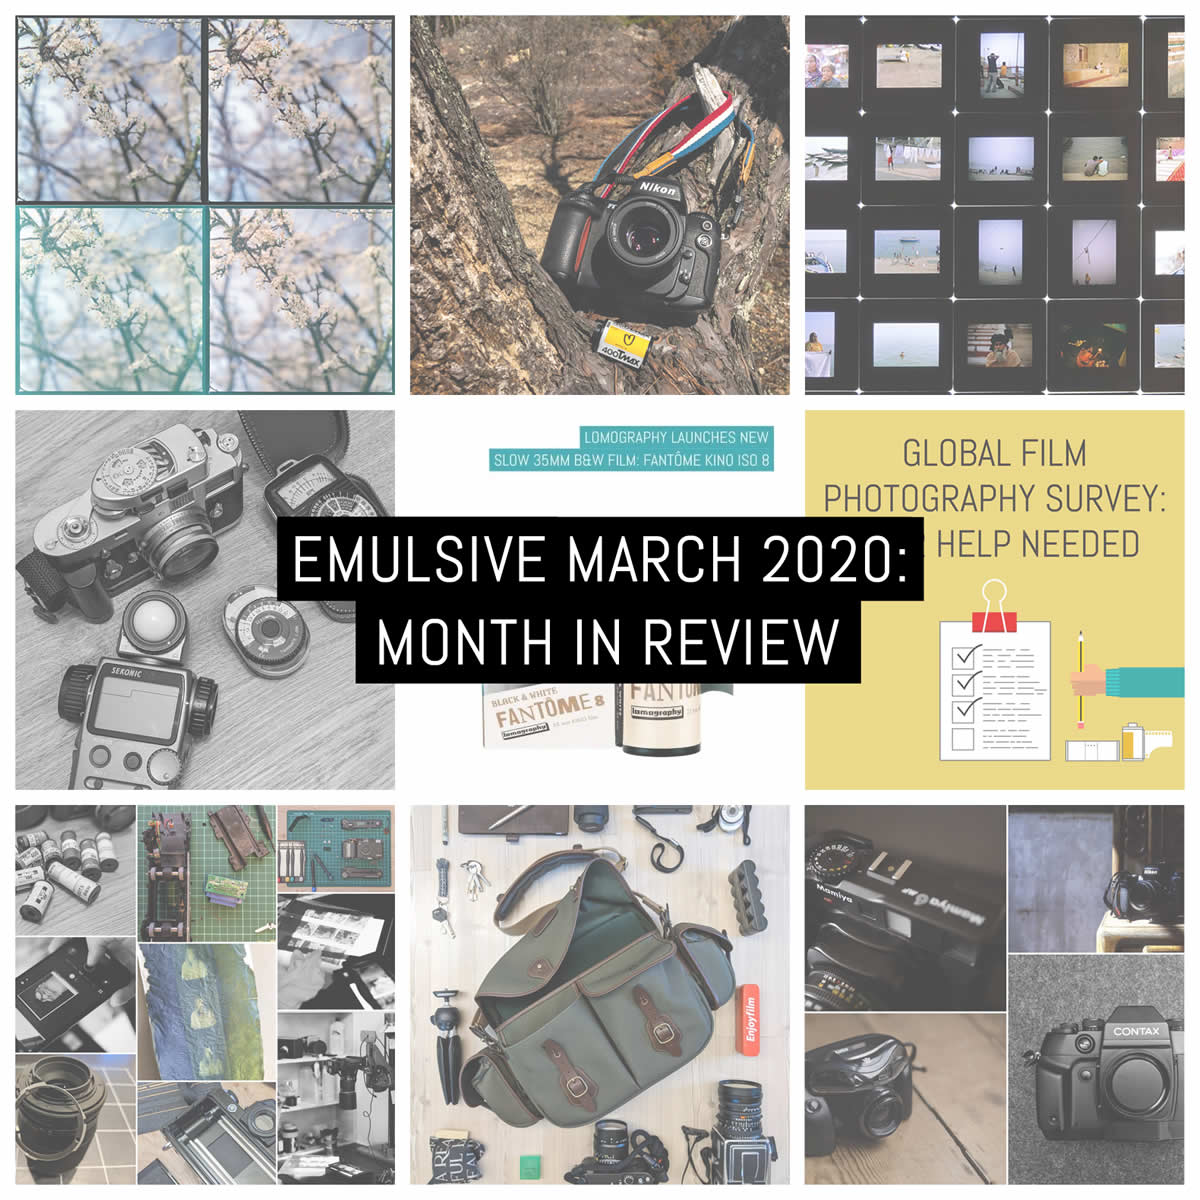 EMULSIVE March 2020: month in review